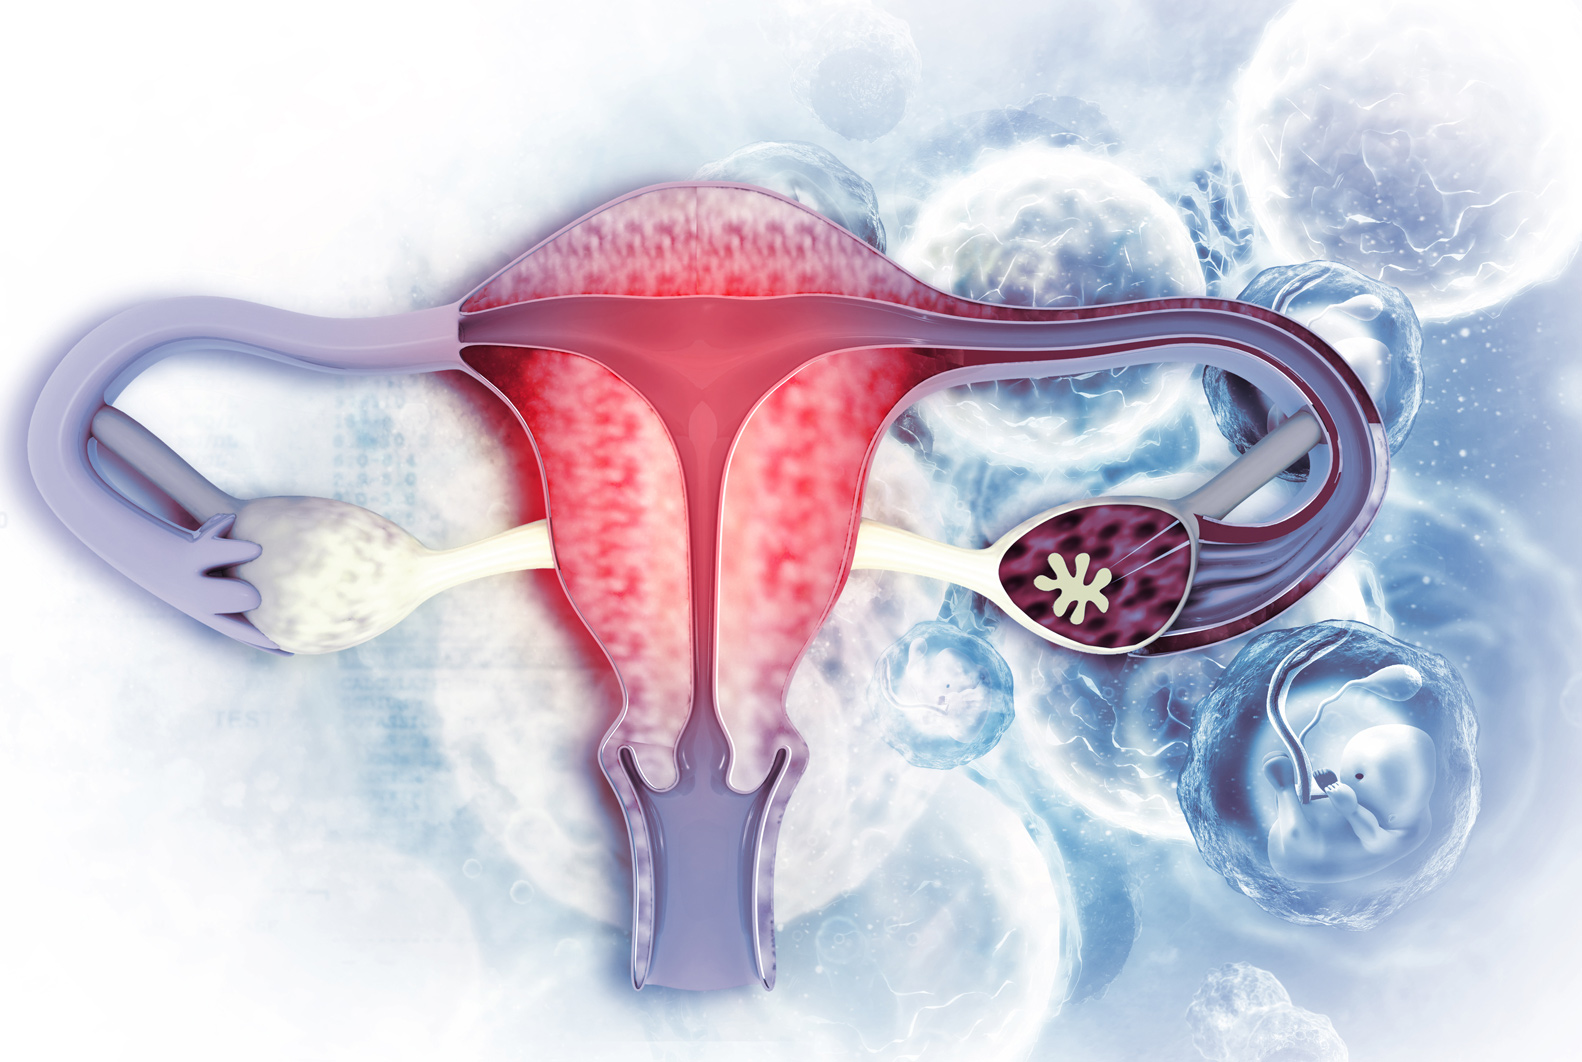 Featured Image for “Ovarian Cancer”